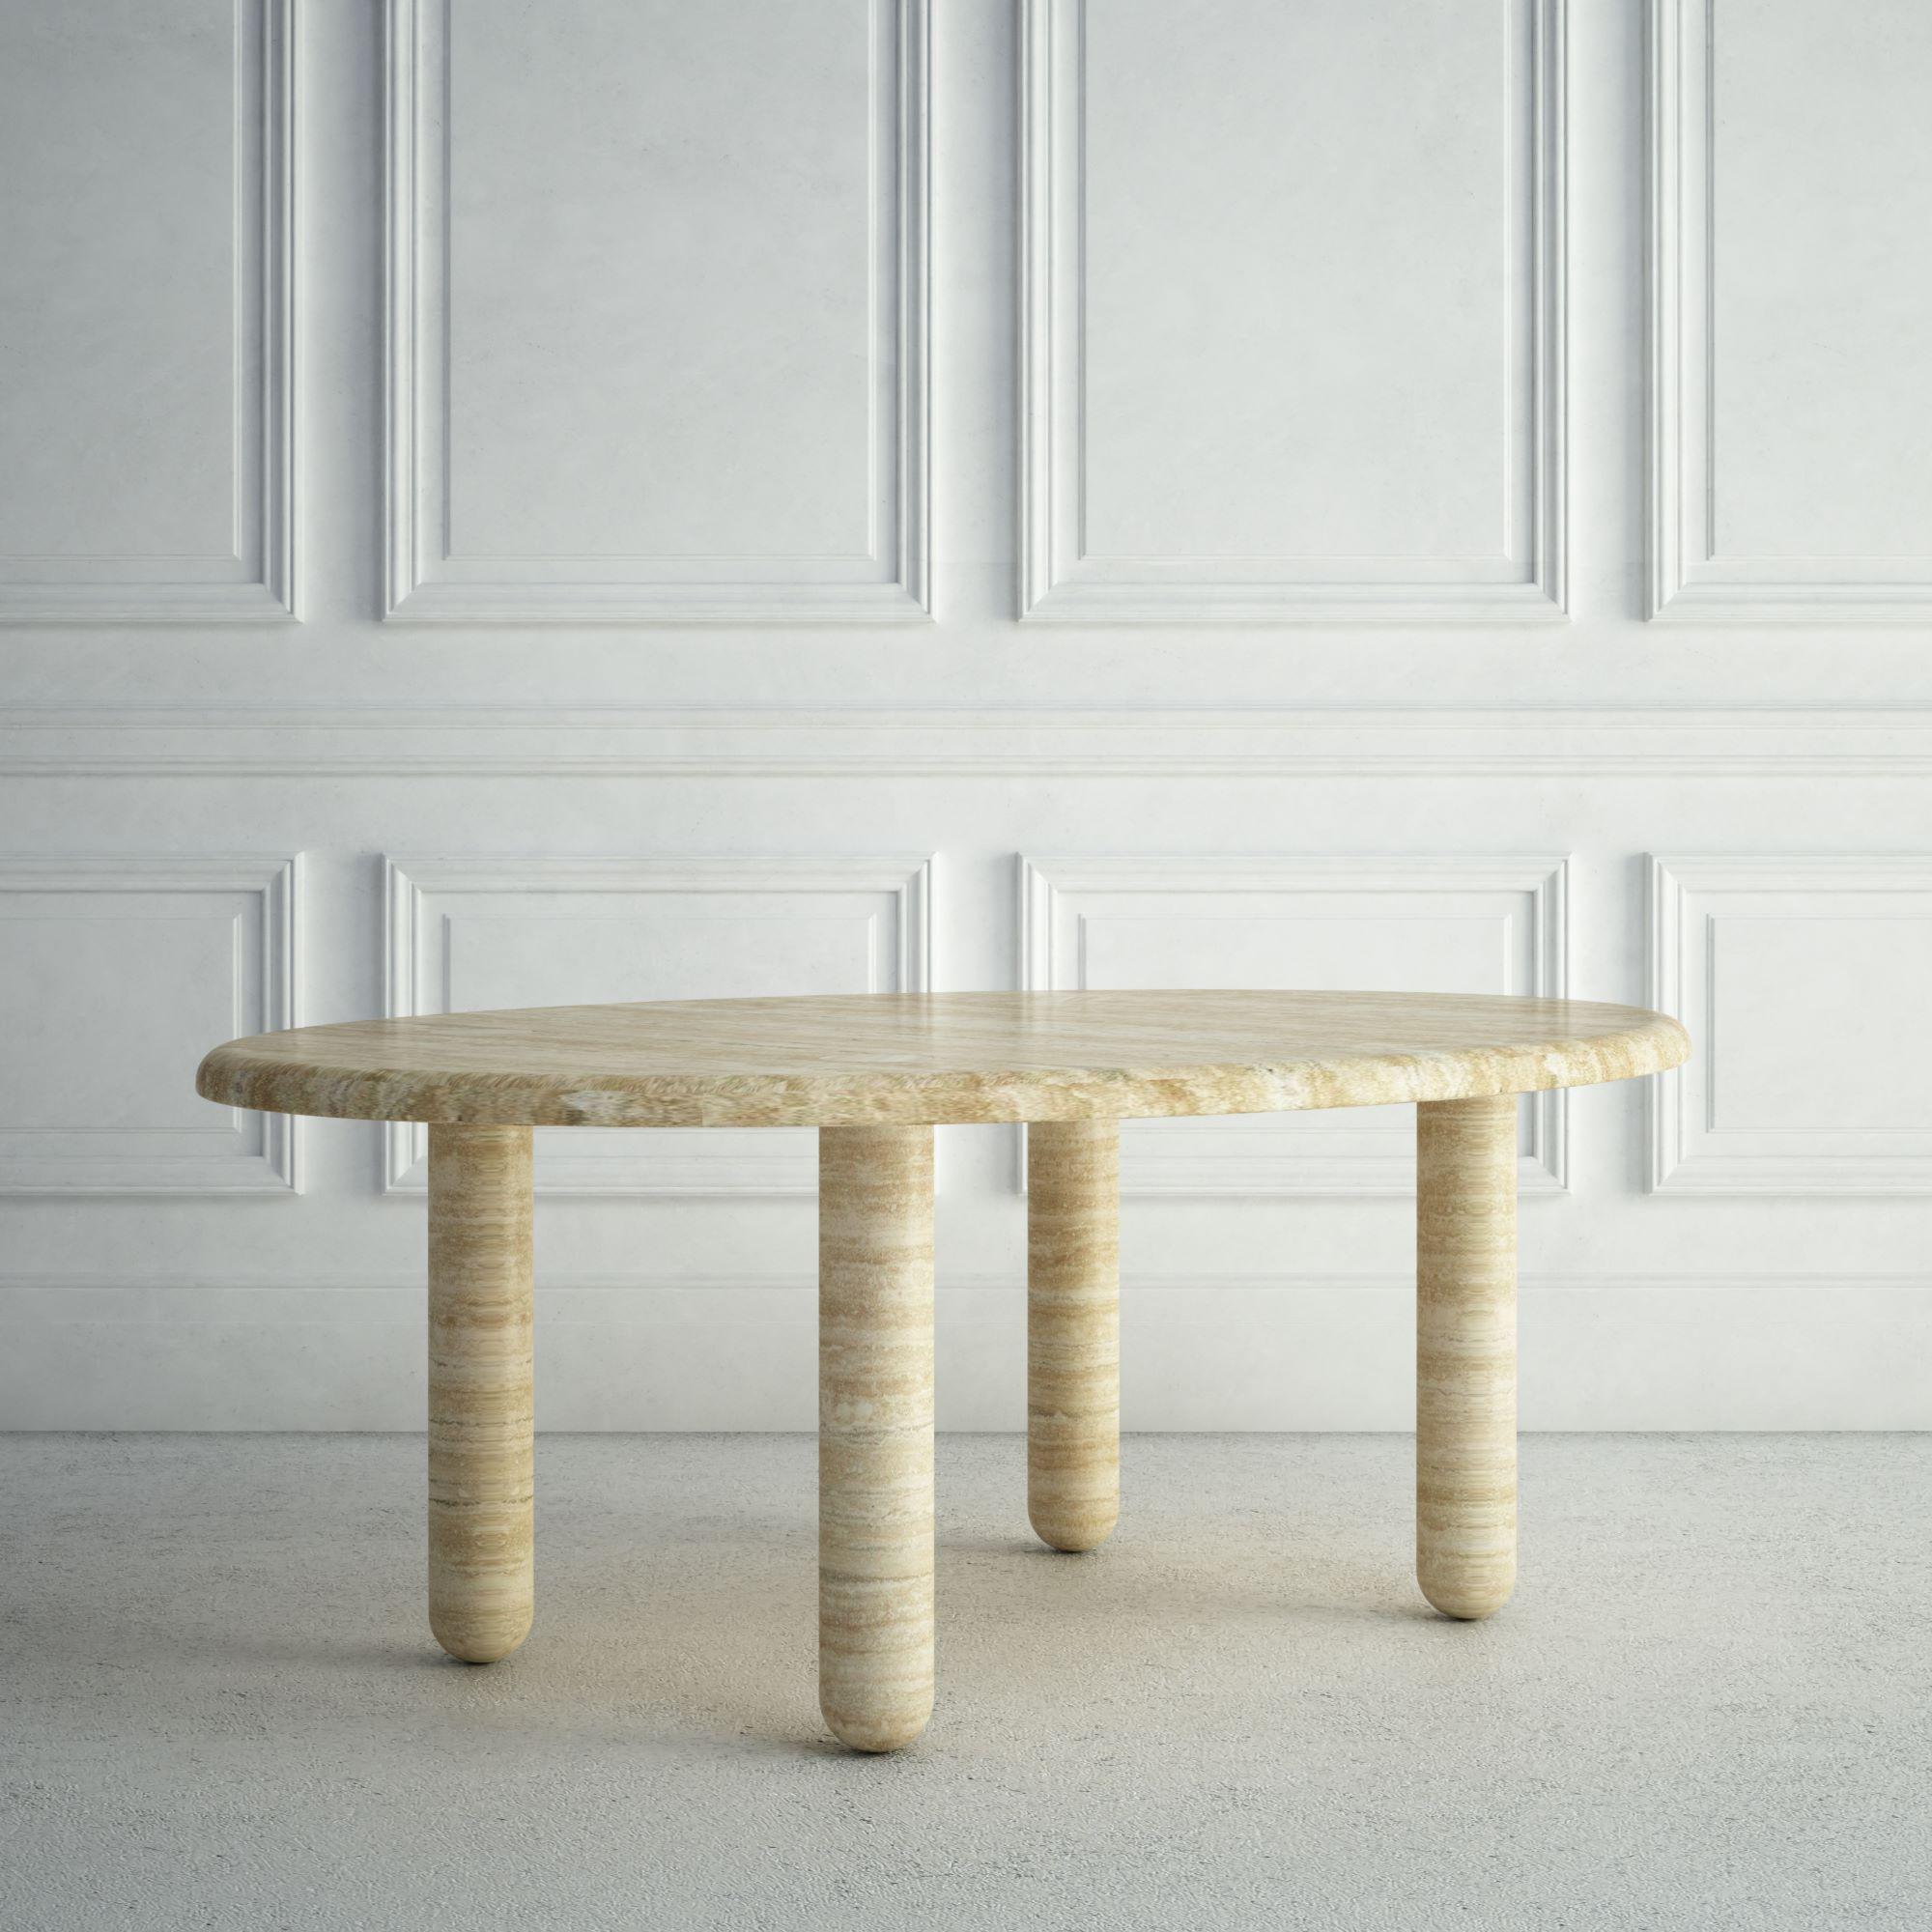 American The Delphine: A Modern Stone Dining Table with an Oval Top and 4 Rounded Legs For Sale